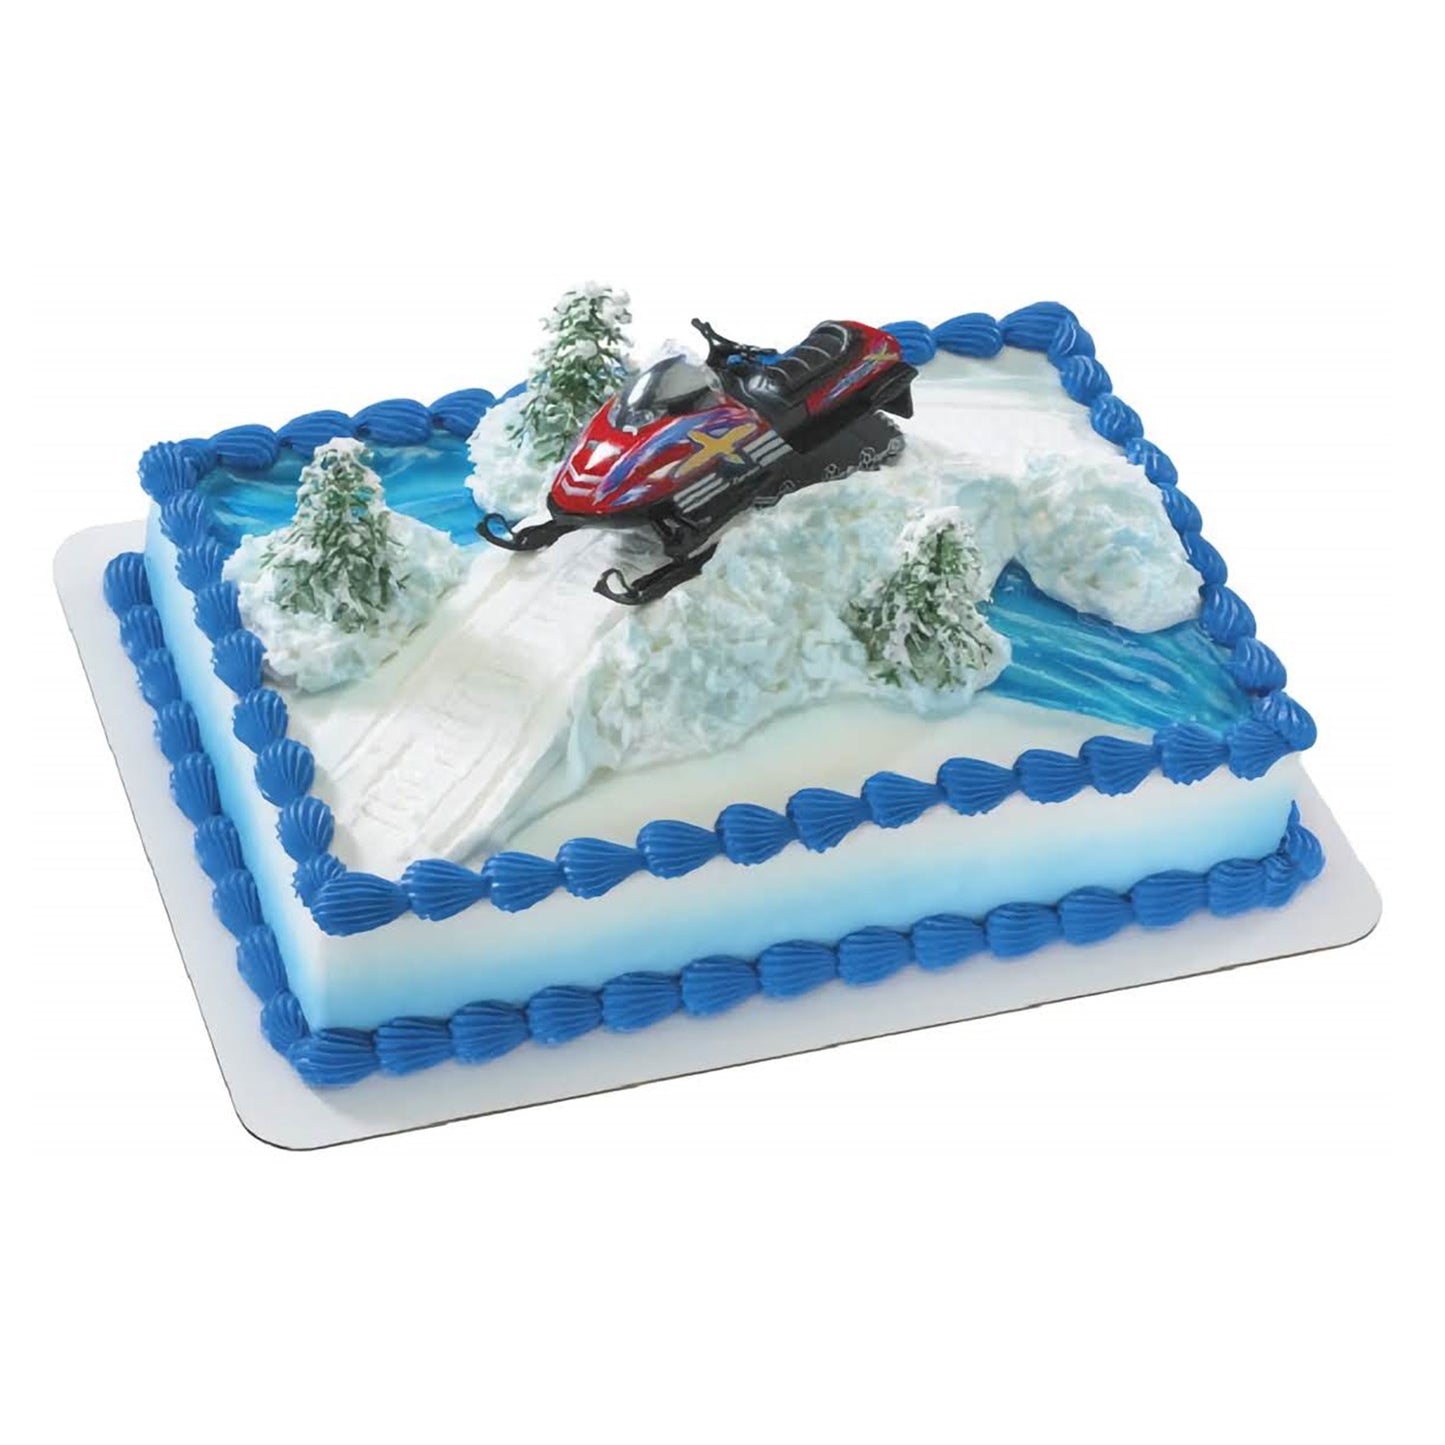 Red snowmobile cake topper kit with snowy trees, perfect for winter or extreme sports-themed parties and cakes.